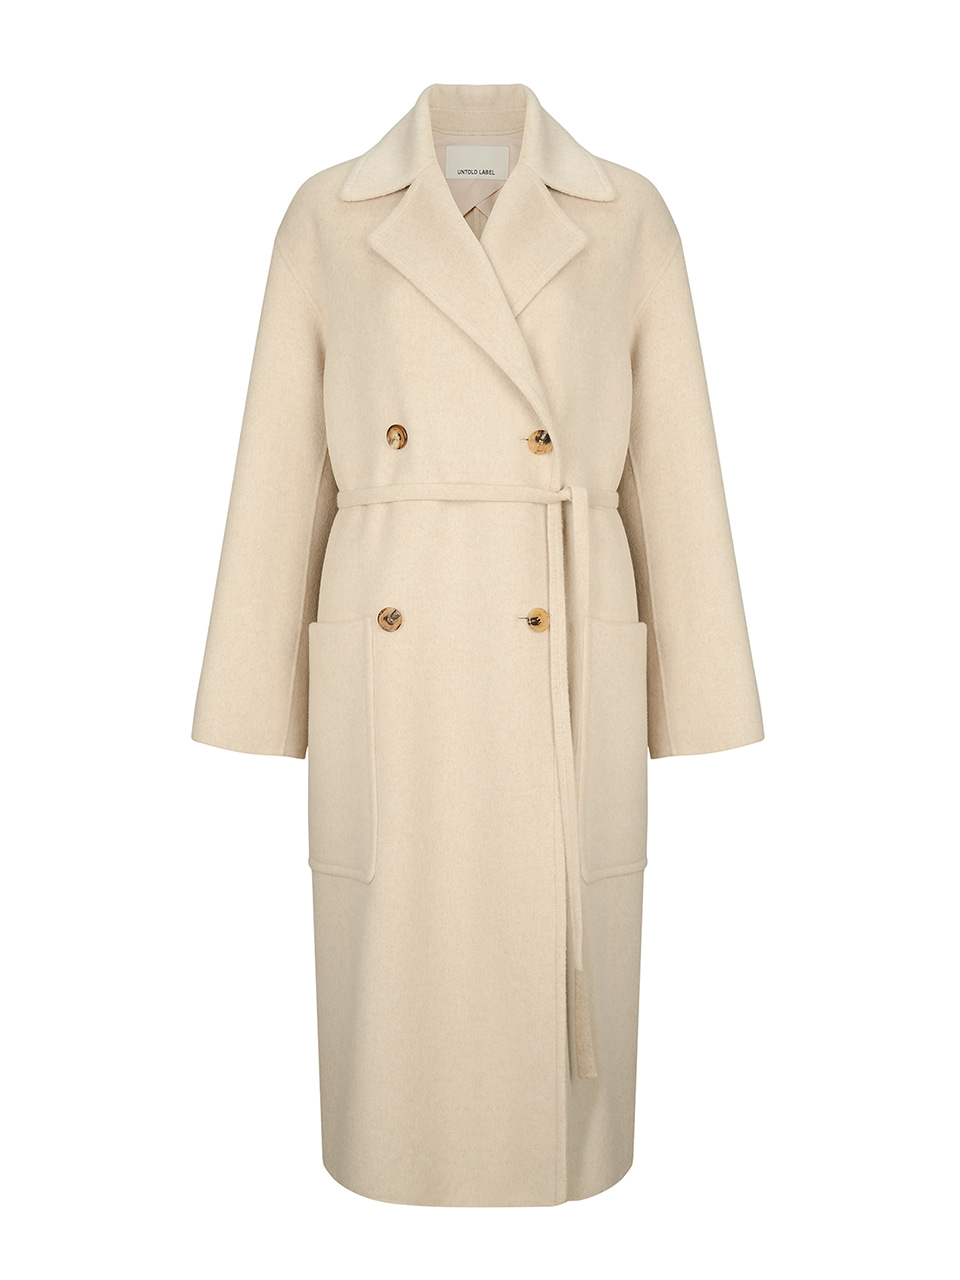 THIN BELTED CASHMERE DOUBLE COAT - OATMEAL